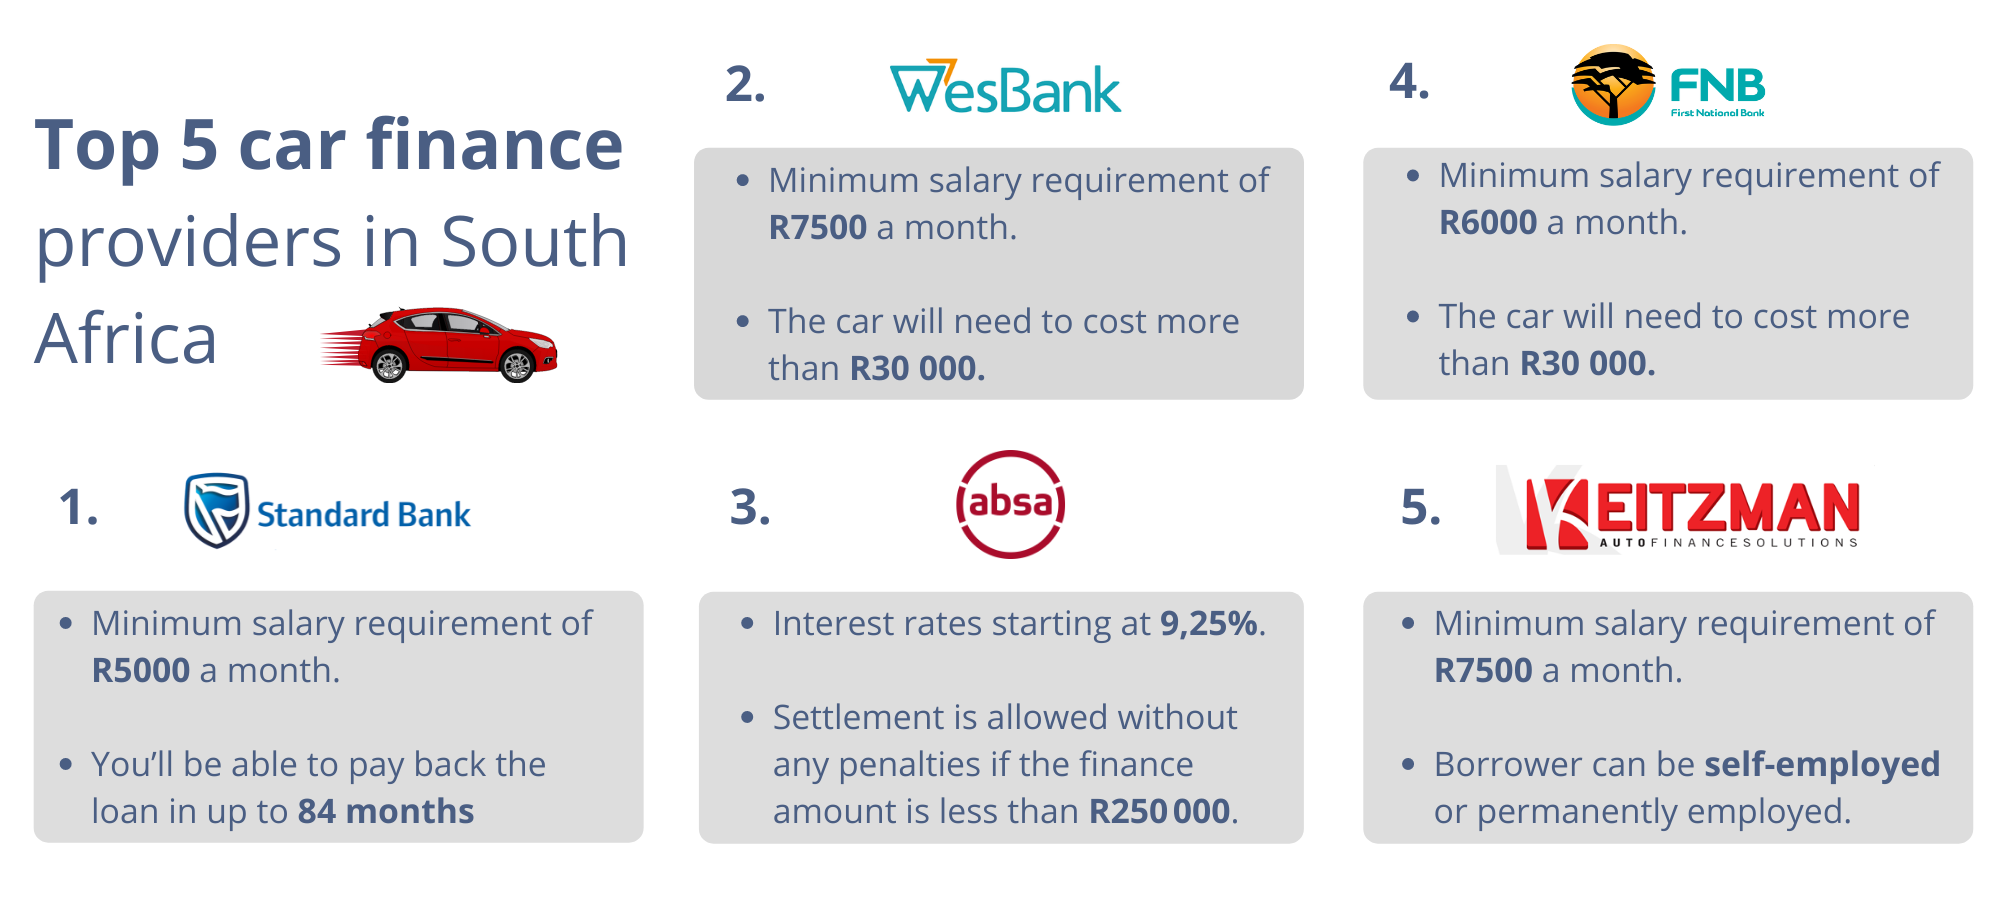 Top 5 car finance providers in South Africa